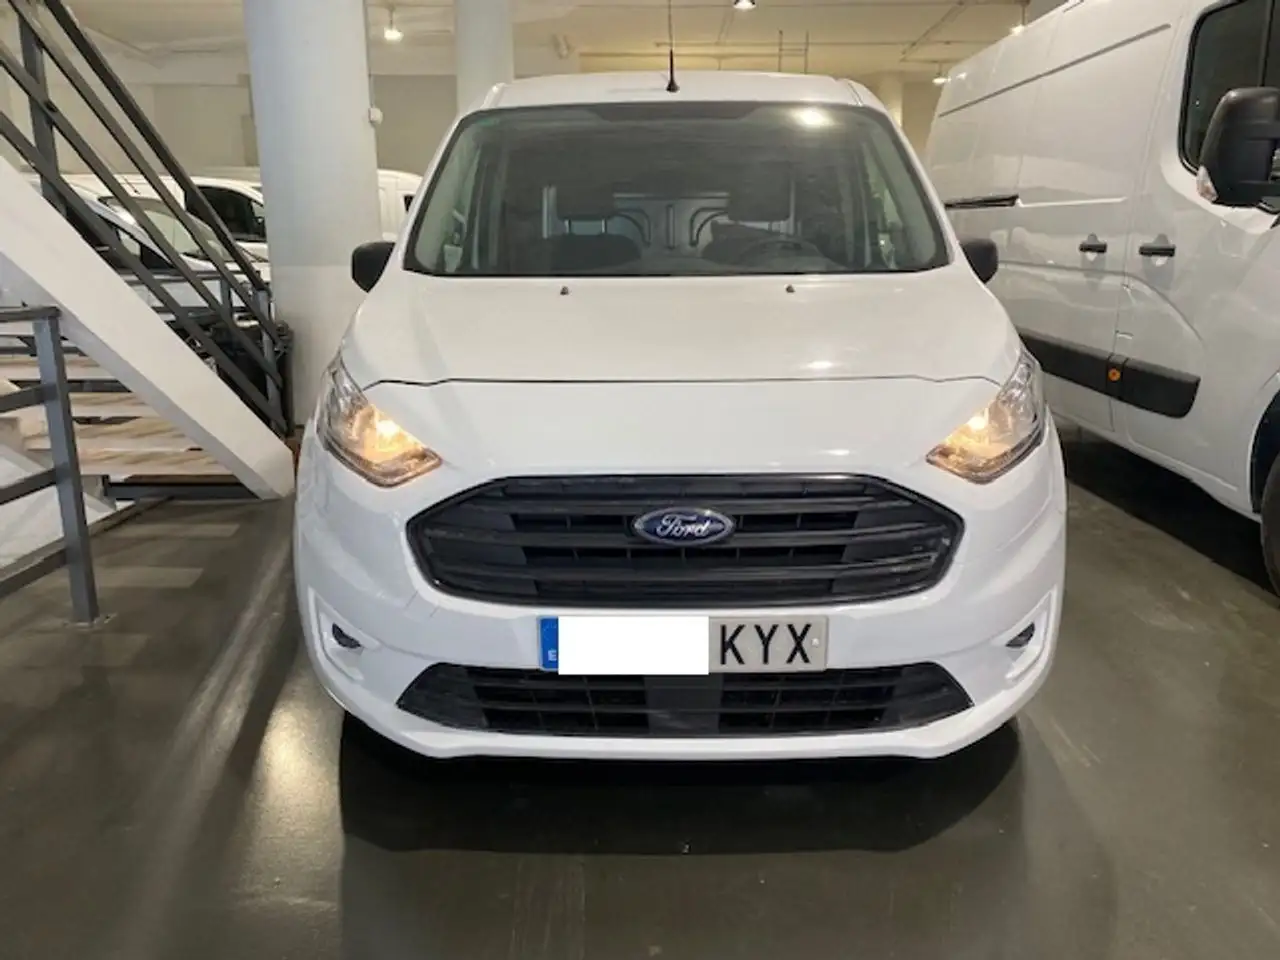  Renting Ford Connect Comercial FT 200 Van L1 Trend 75 Blanco